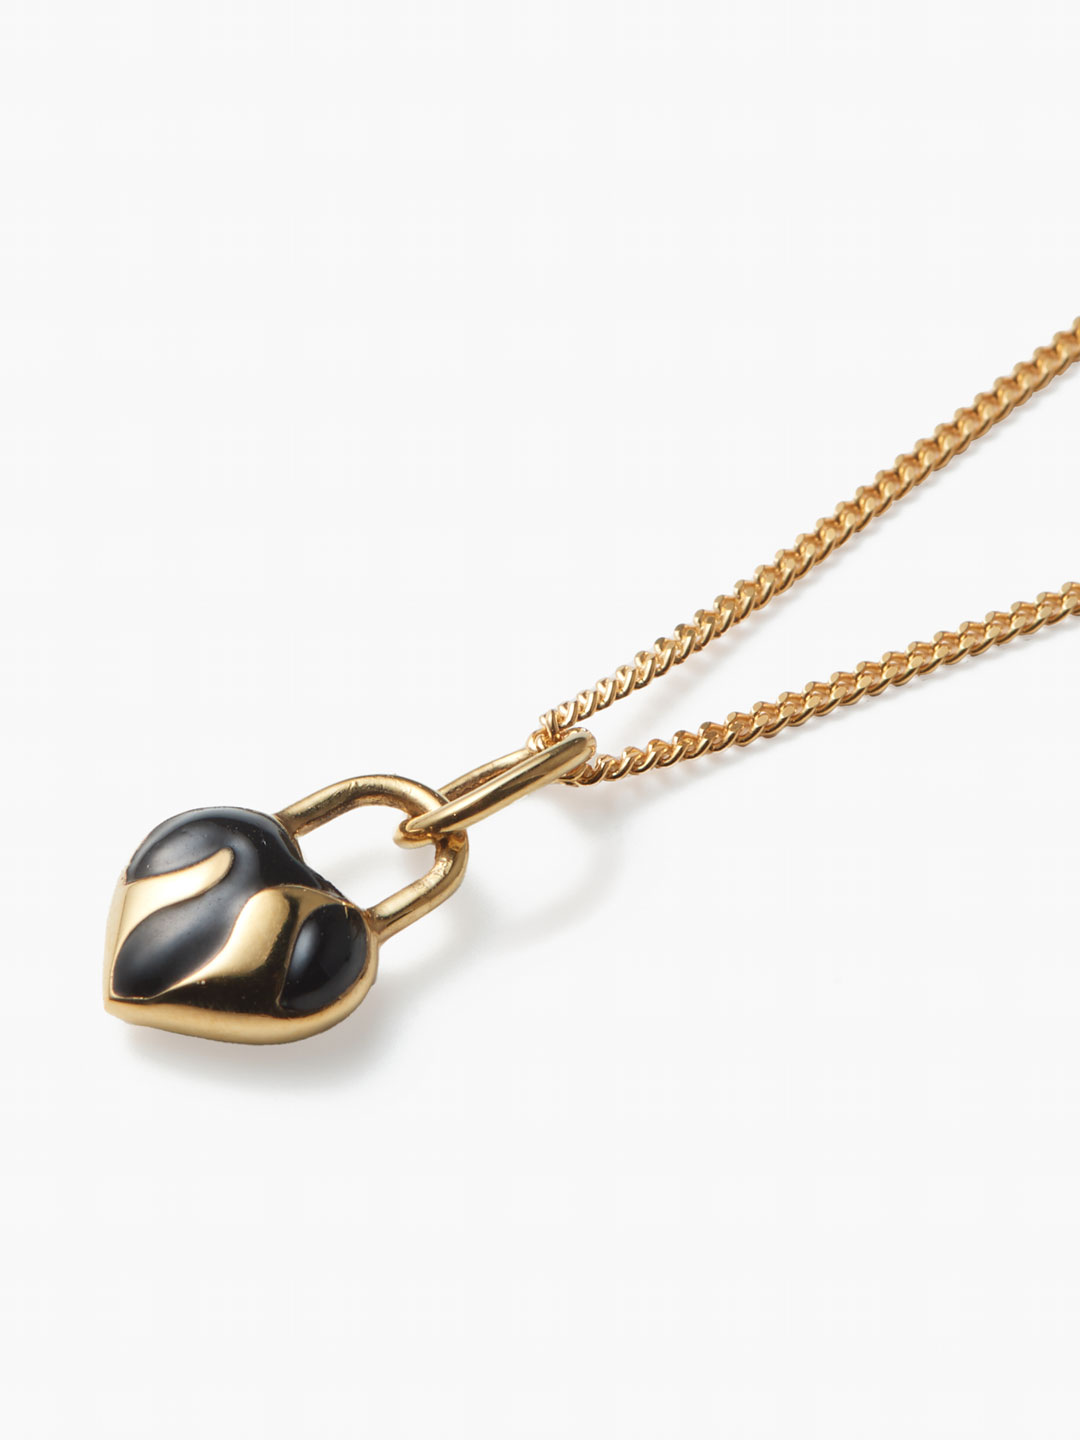 Passion Necklace Black Gold - Yellow Gold